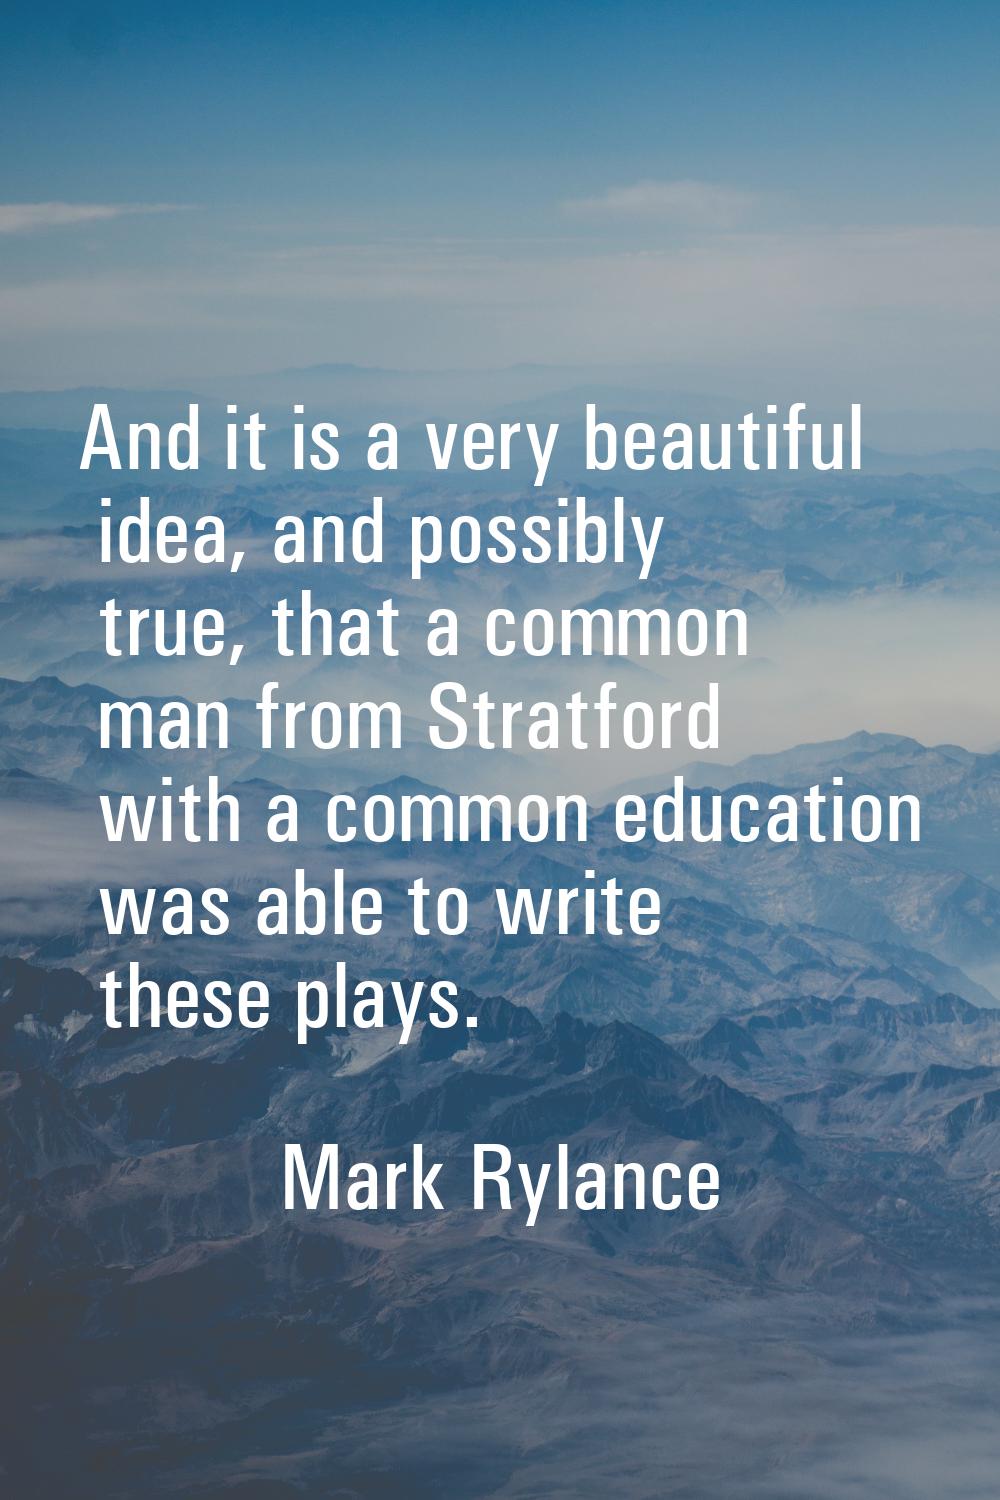 And it is a very beautiful idea, and possibly true, that a common man from Stratford with a common 